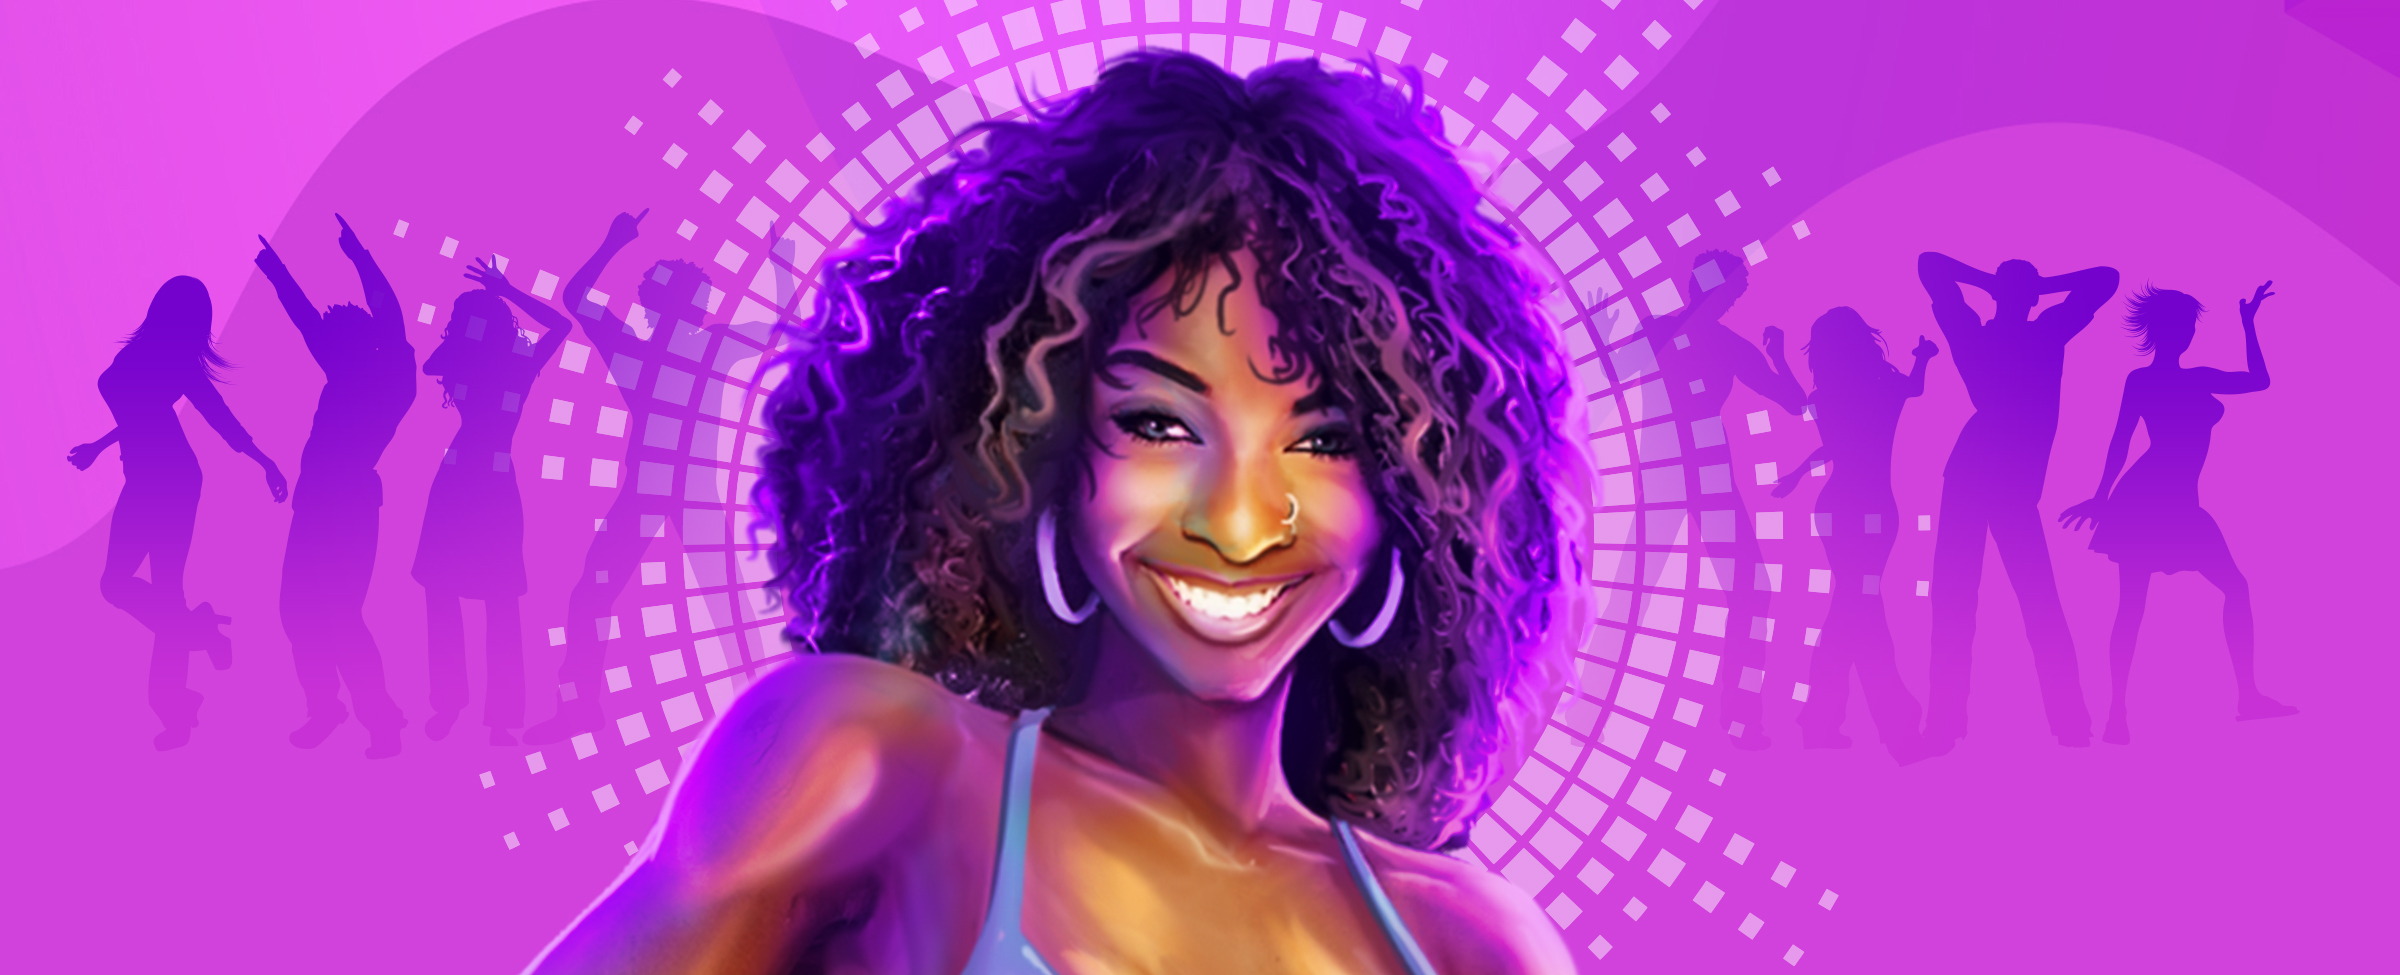 An illustrated woman in her 20s with shoulder-length curly hair and a big smile stands in front of the reflected lights from a disco ball, while silhouettes of people dancing are seen behind her, against a purple background.